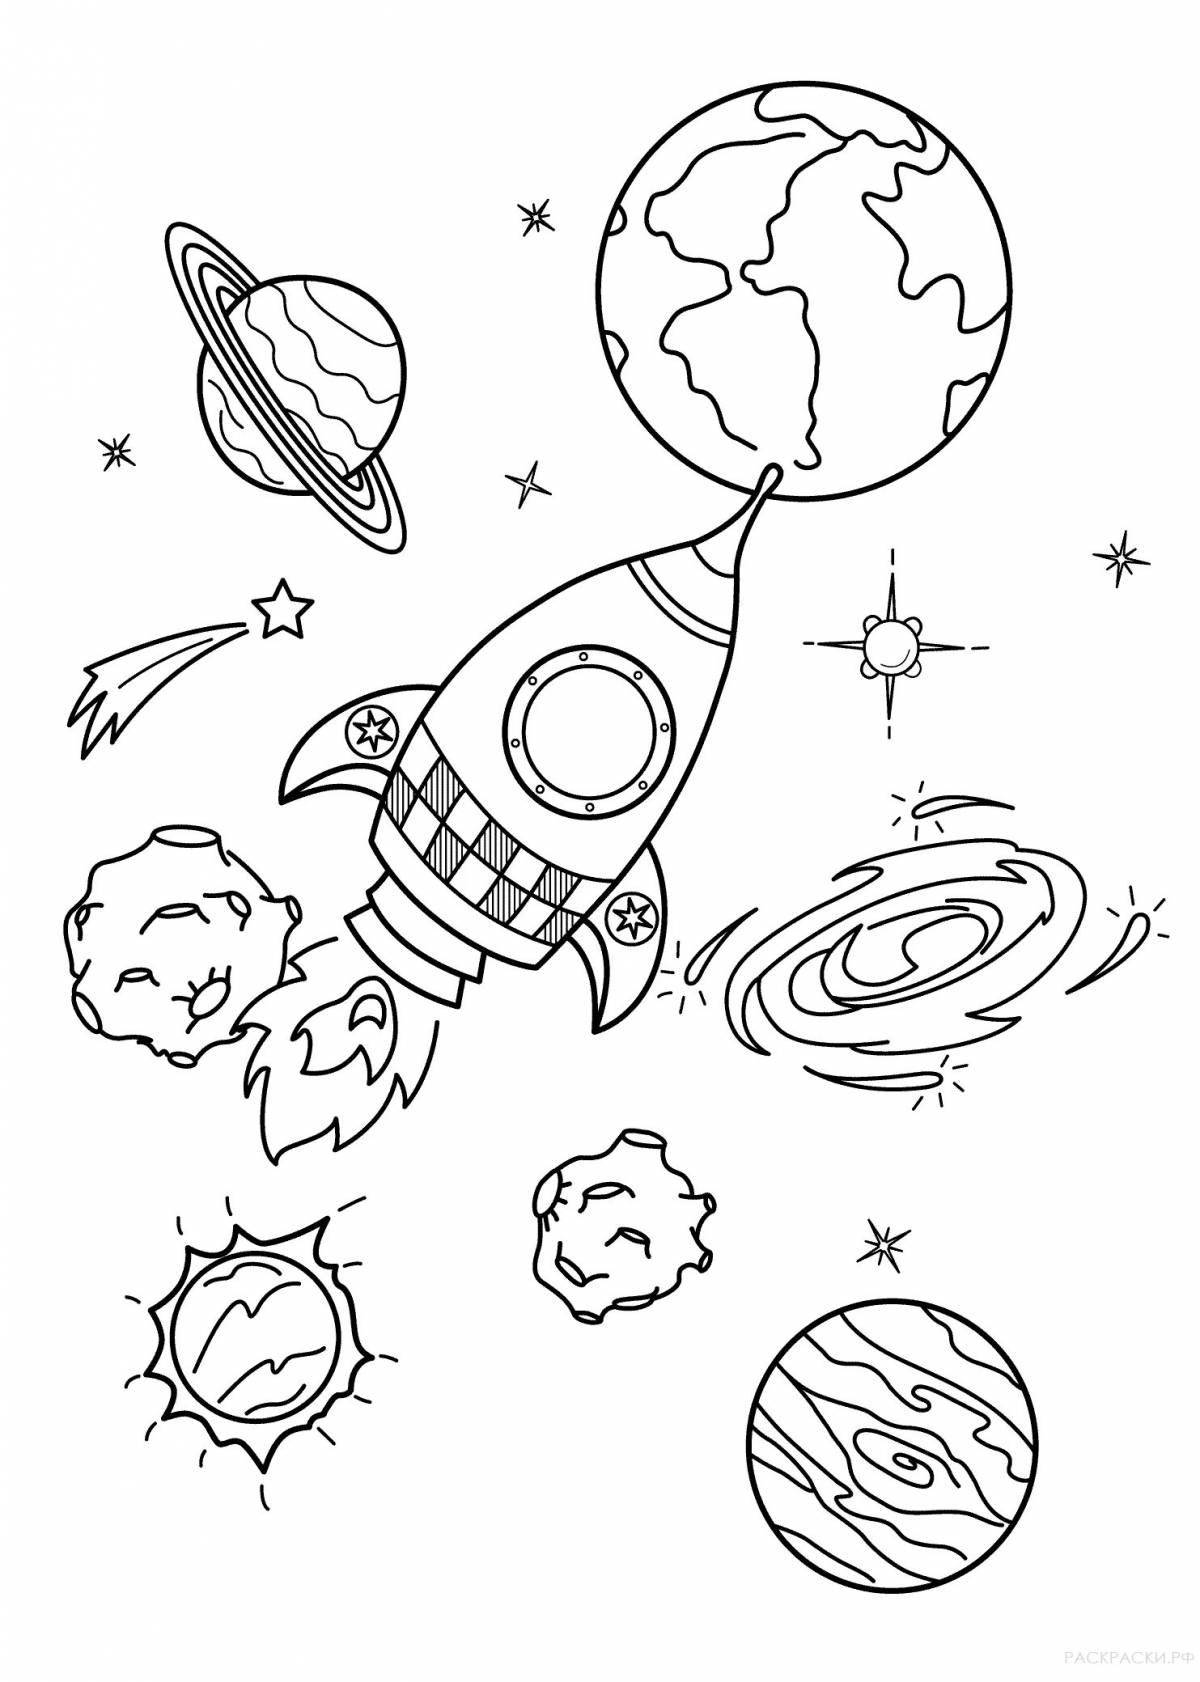 Shining Space coloring page